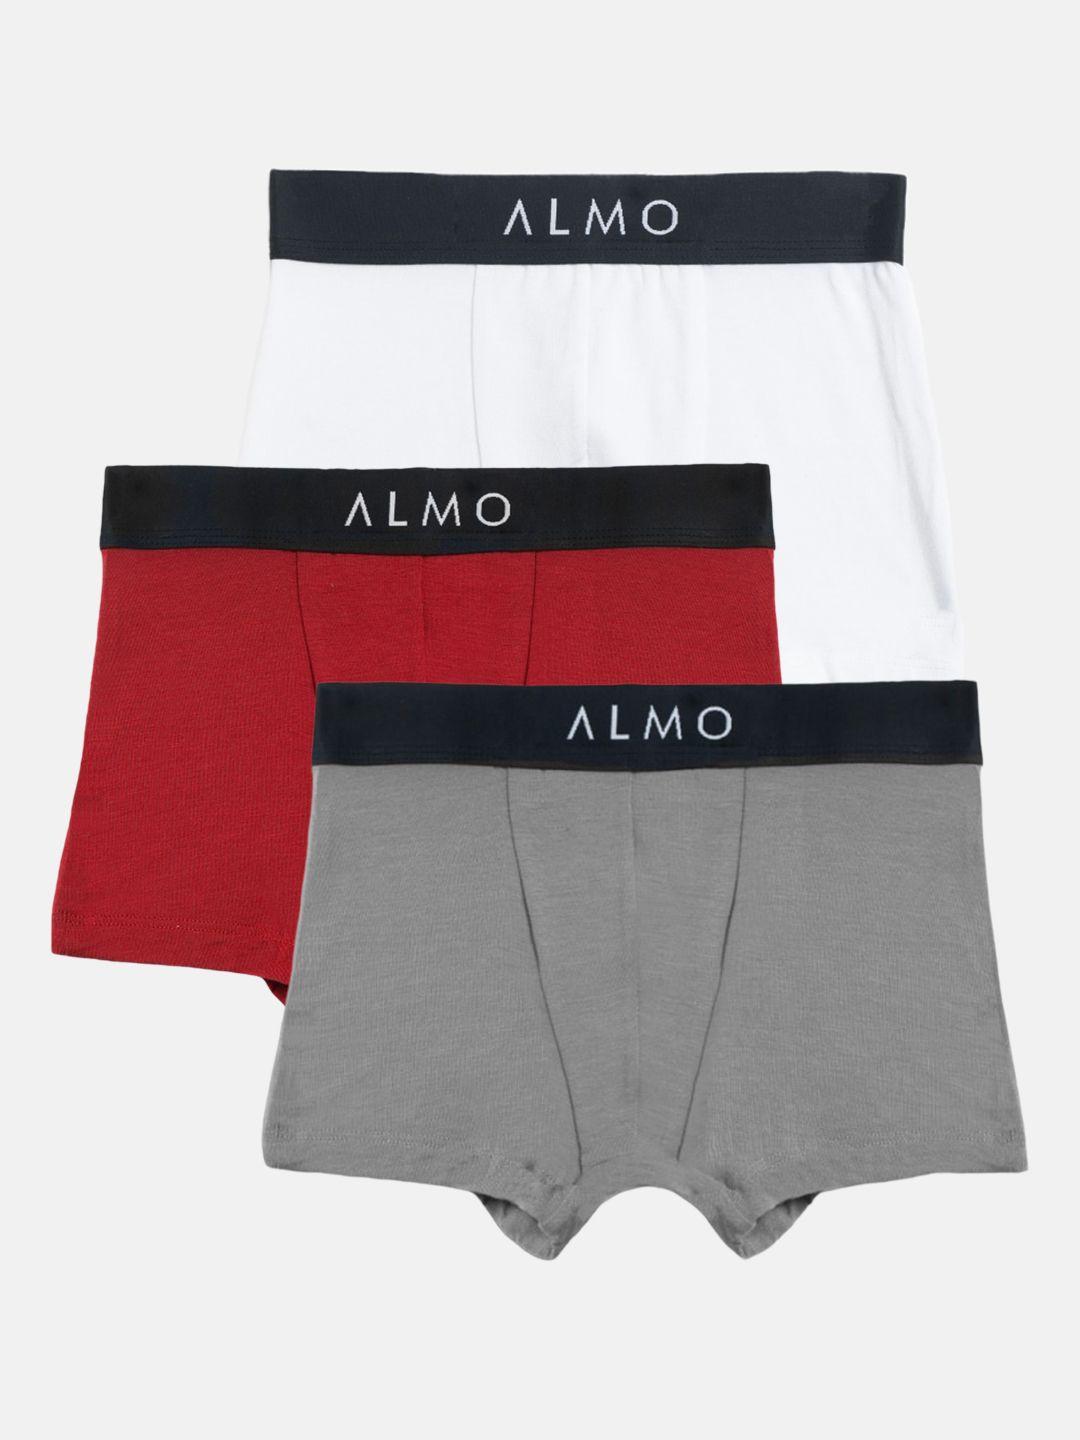 almo wear boys pack of 3 anti-microbial trunks